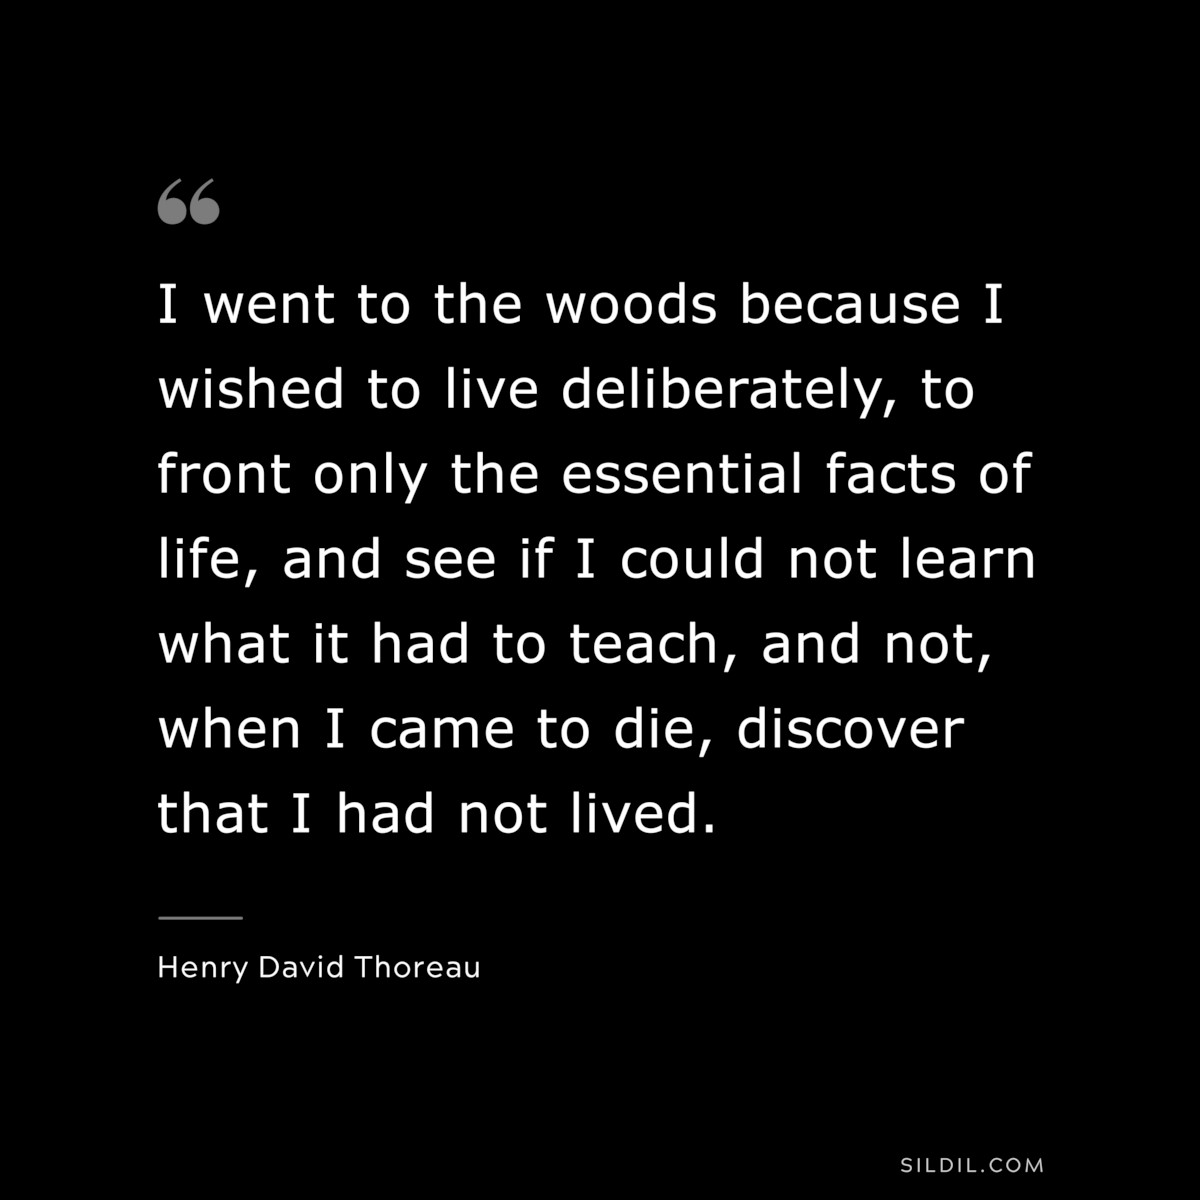 I went to the woods because I wished to live deliberately, to front only the essential facts of life, and see if I could not learn what it had to teach, and not, when I came to die, discover that I had not lived. — Henry David Thoreau